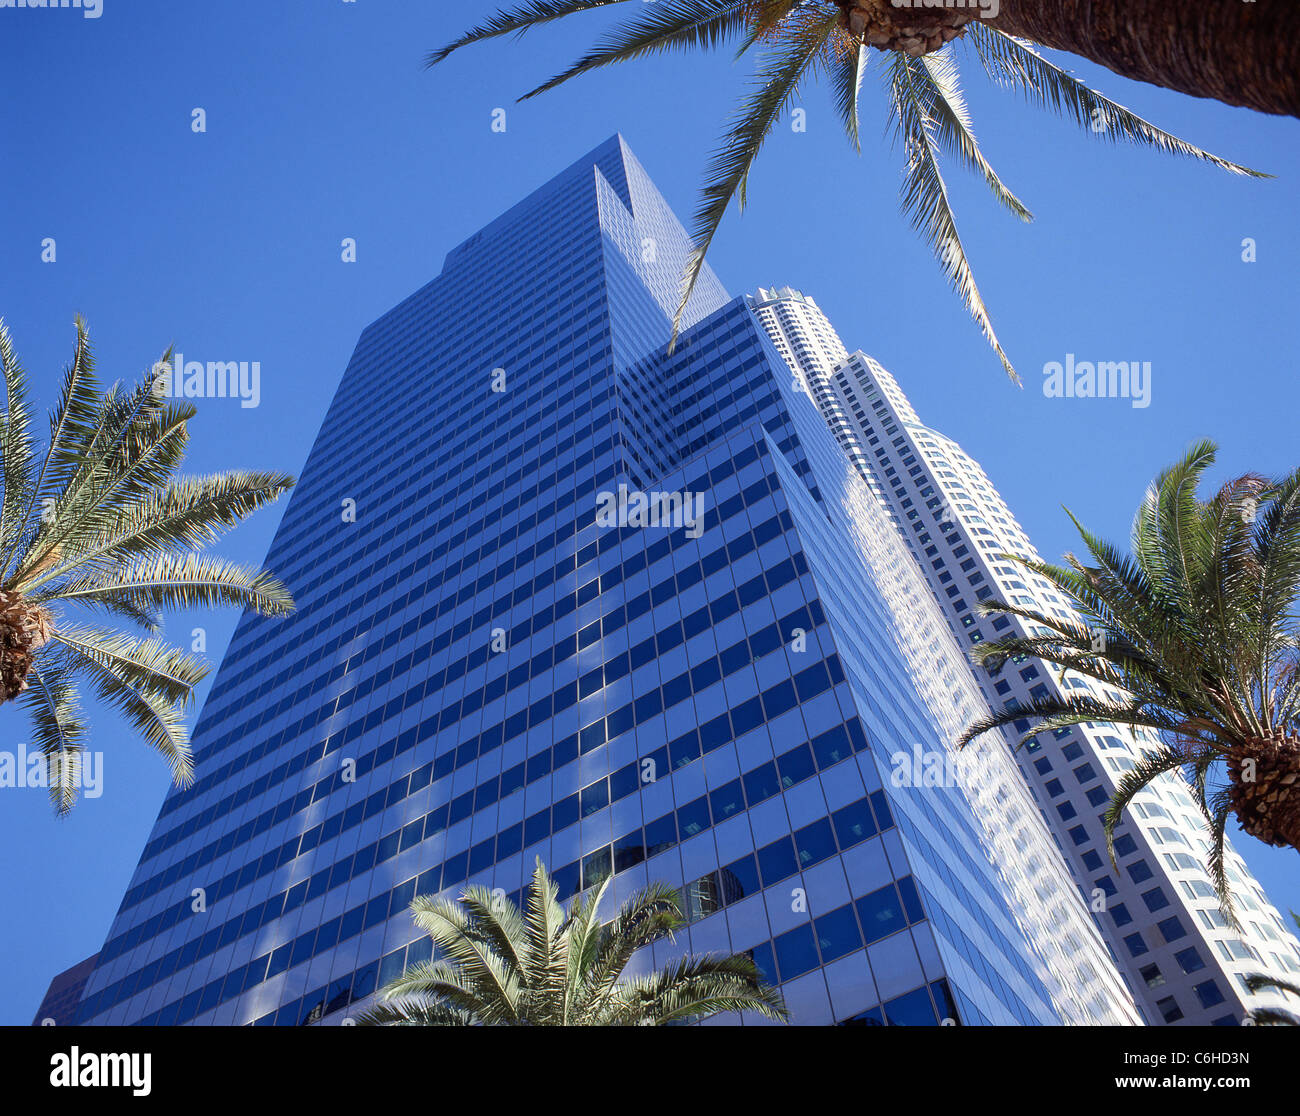 Skyscraper in downtown business district, Los Angeles, California, United States of America Stock Photo